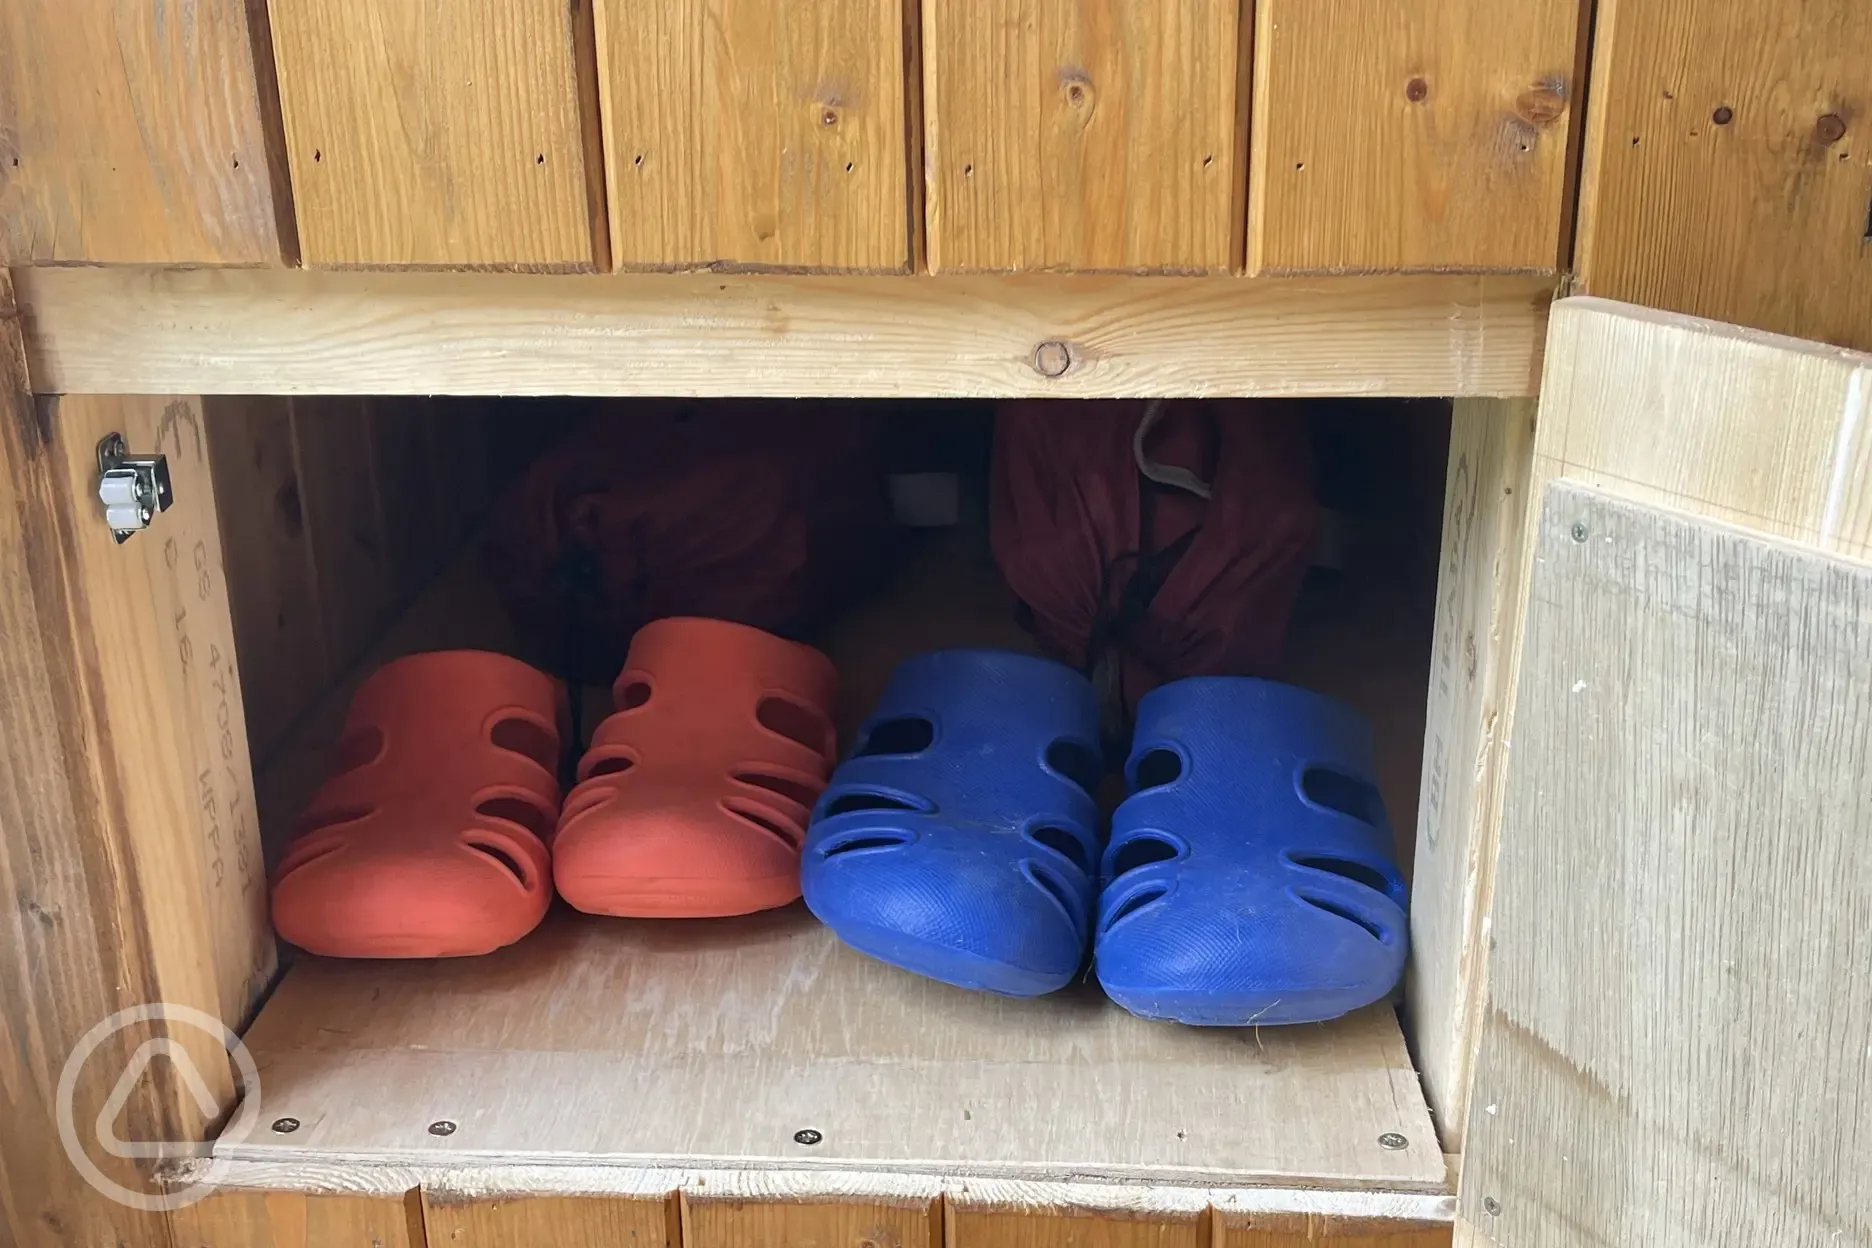 Storage for the crocs and two camping chairs provided